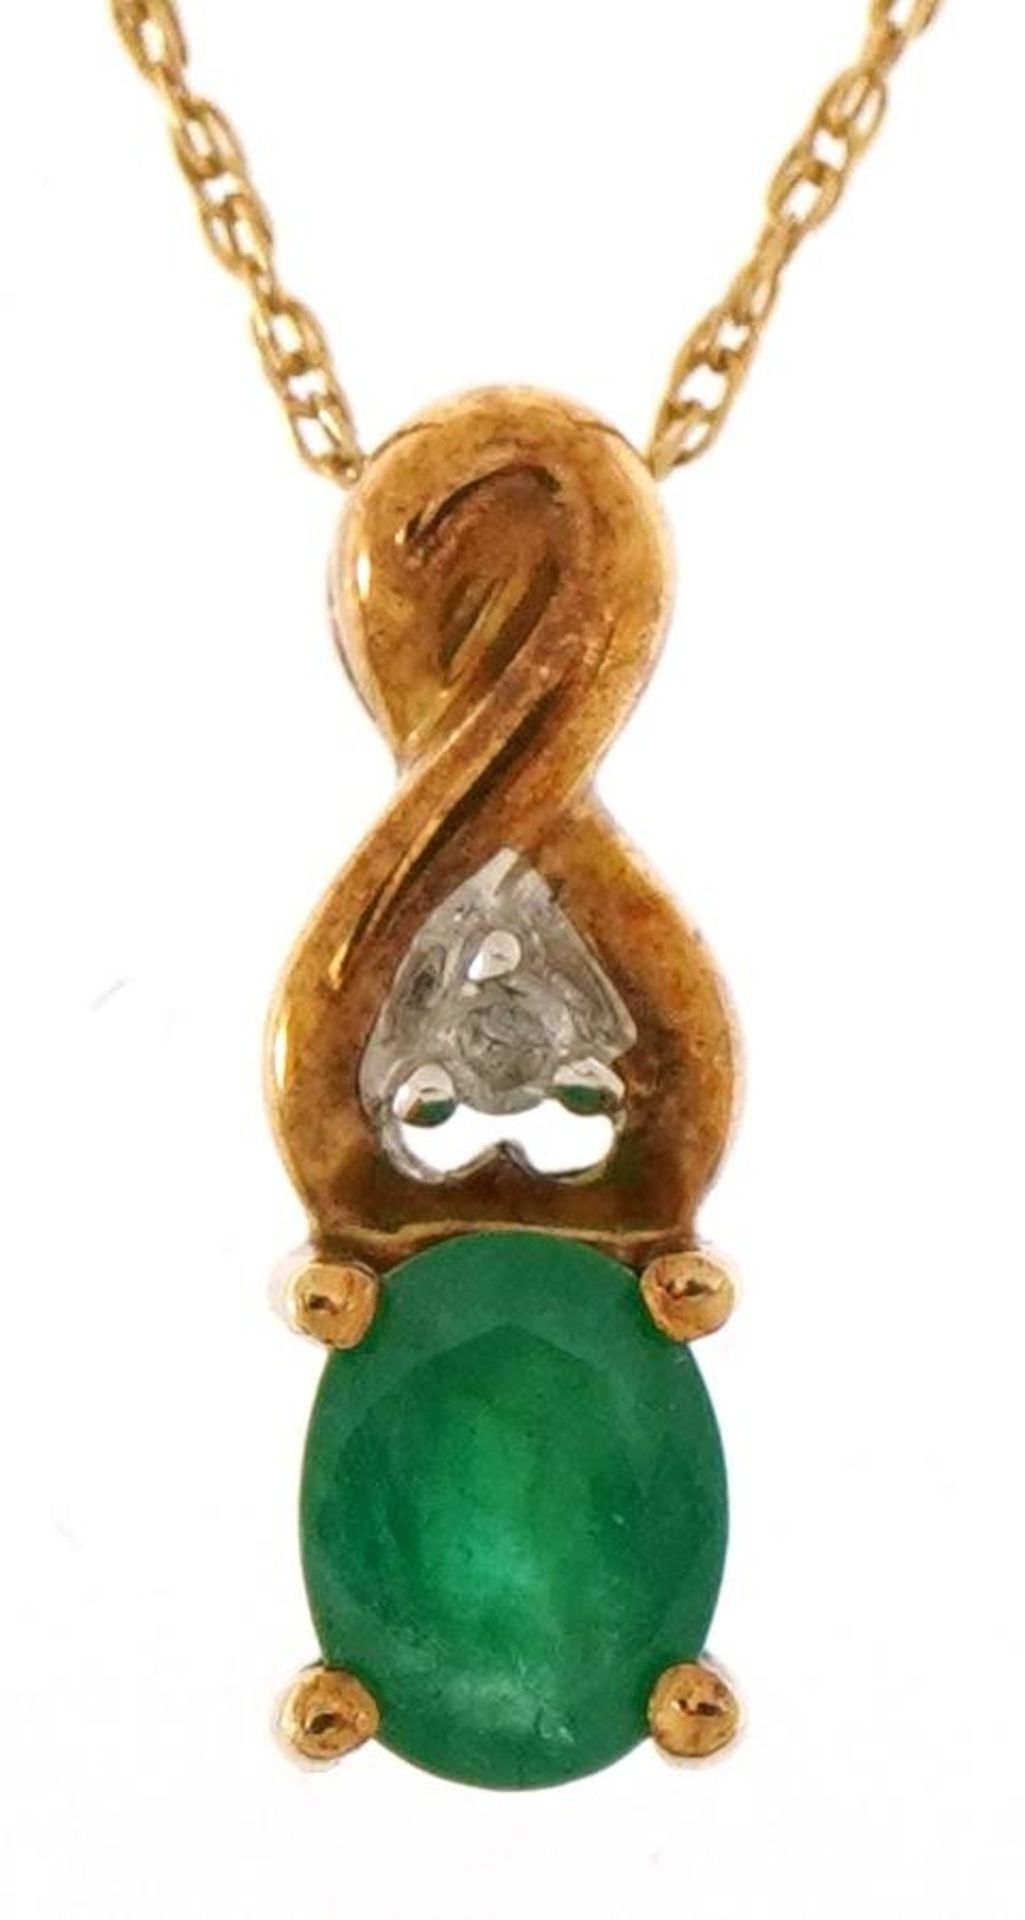 9ct gold emerald and diamond pendant on a 9ct gold necklace, 1.3cm high and 46cm in length, total